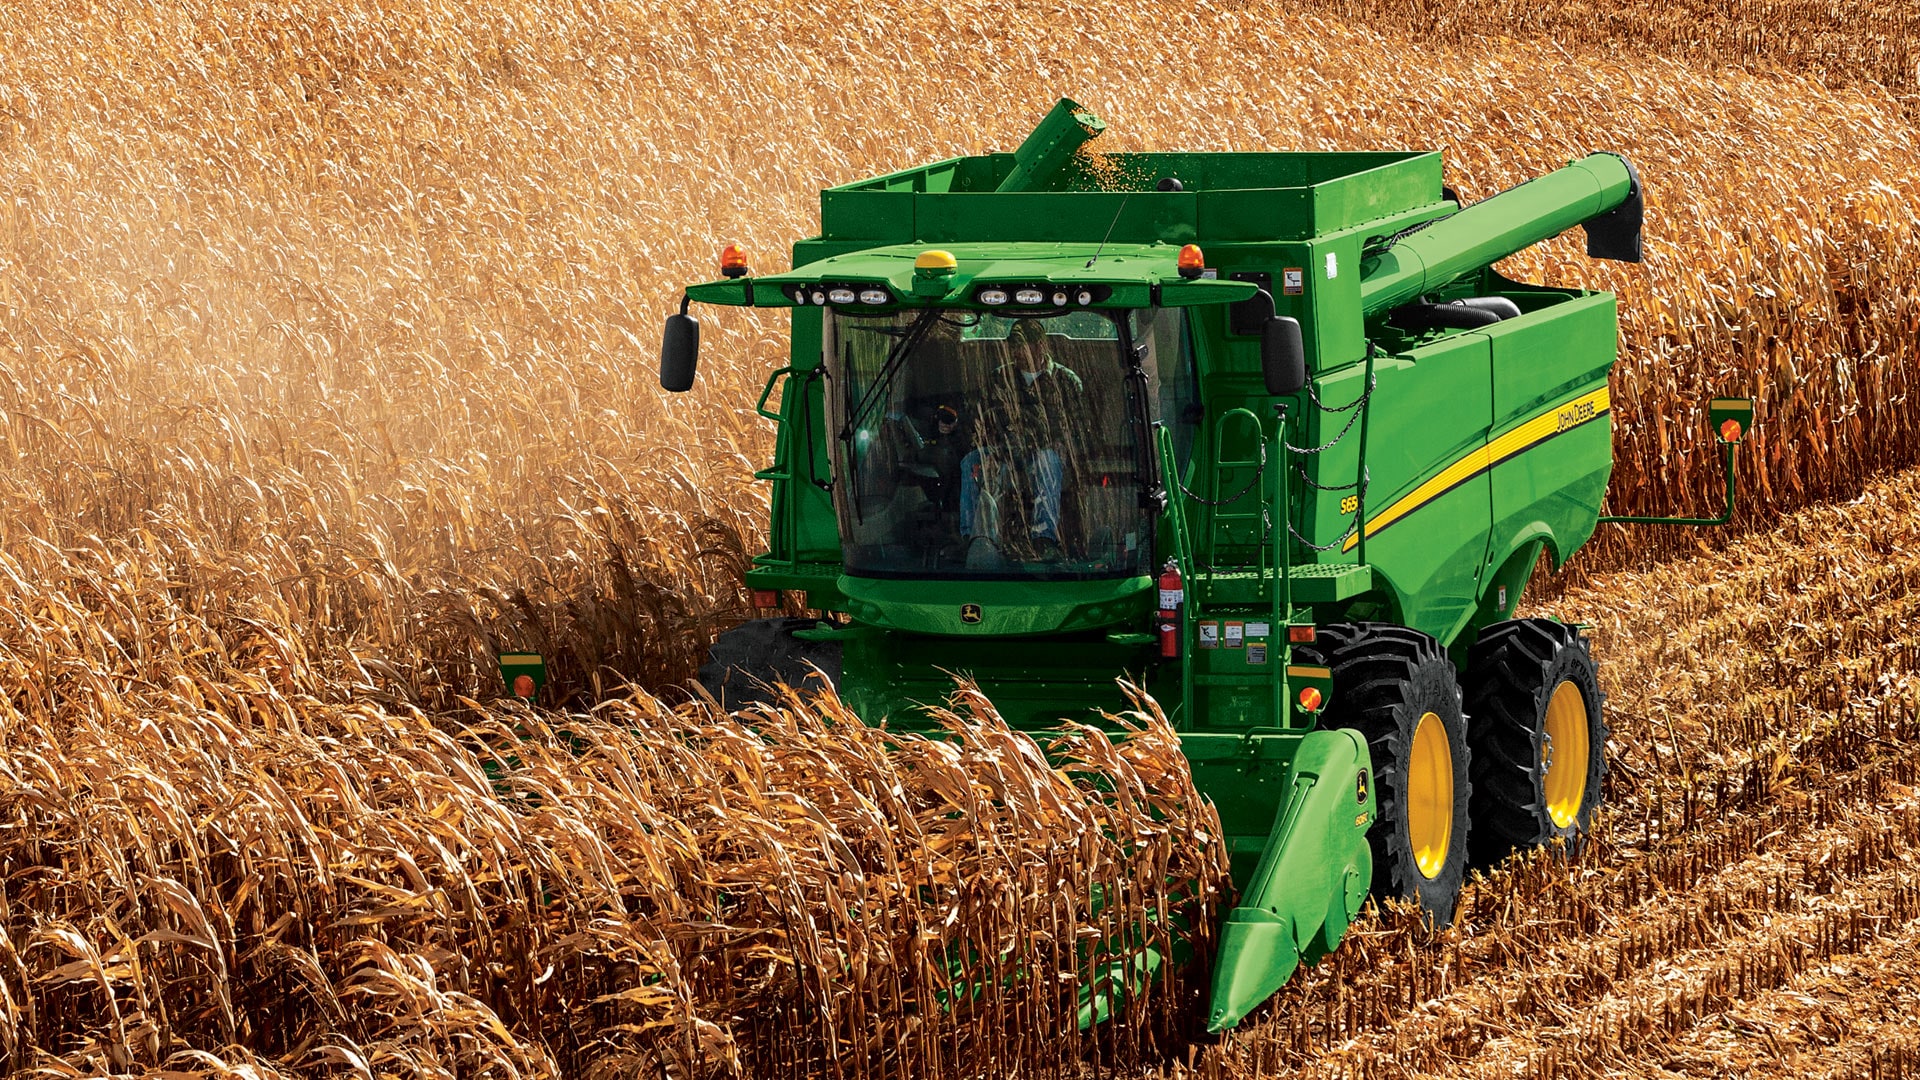 sseries-combines-R4A037573-1920x1080